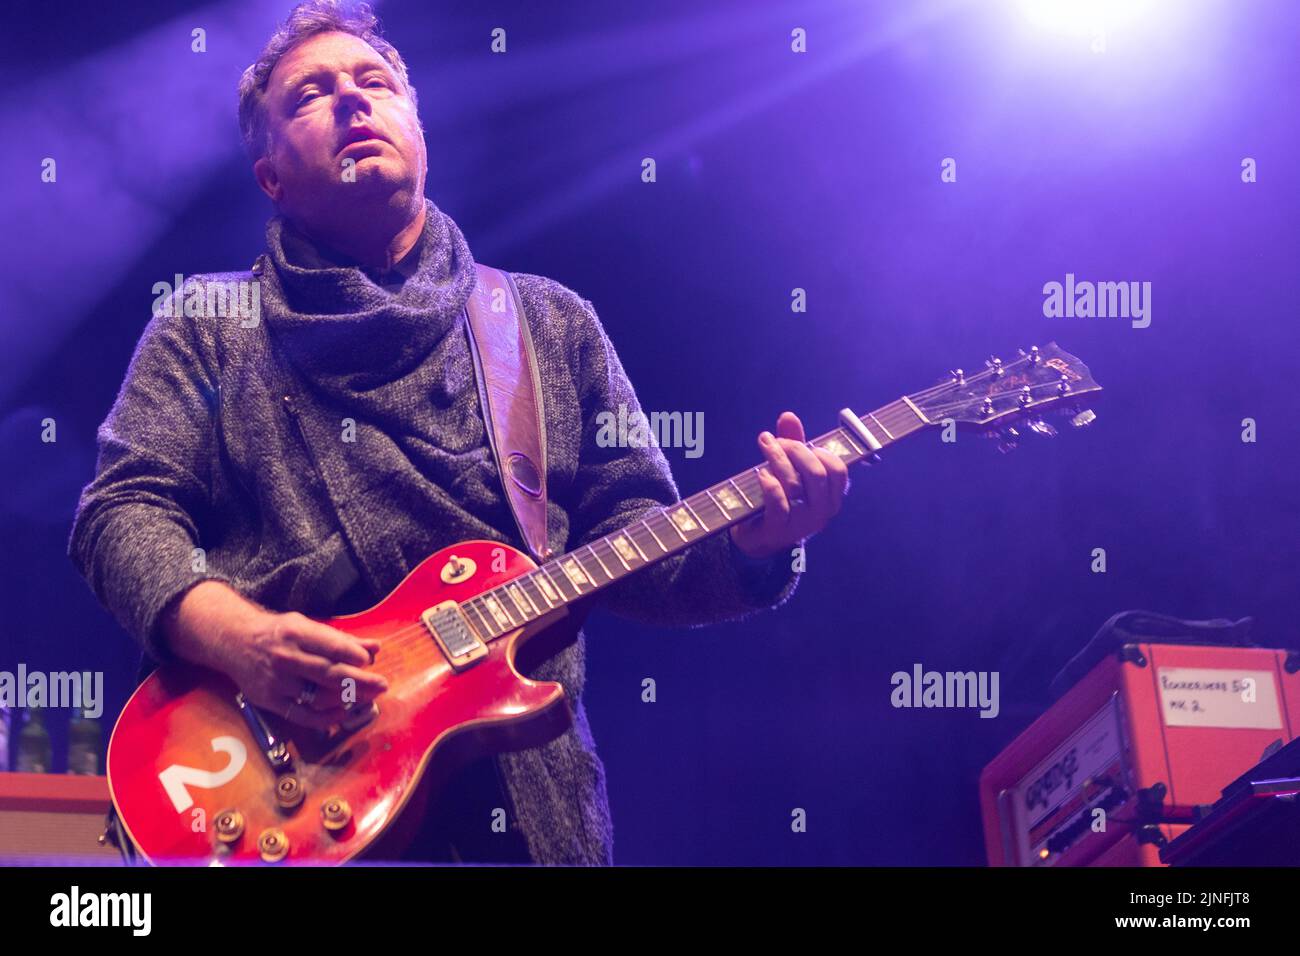 Fredrikstad, Norway. 29th, July 2022. The Scottish rock band Travis performs a live concert during the Norwegian festival Maanefestivalen 2022 in Fredrikstad. Here musician Andy Dunlop is seen live on stage. (Photo credit: Gonzales Photo - Per-Otto Oppi). Stock Photo